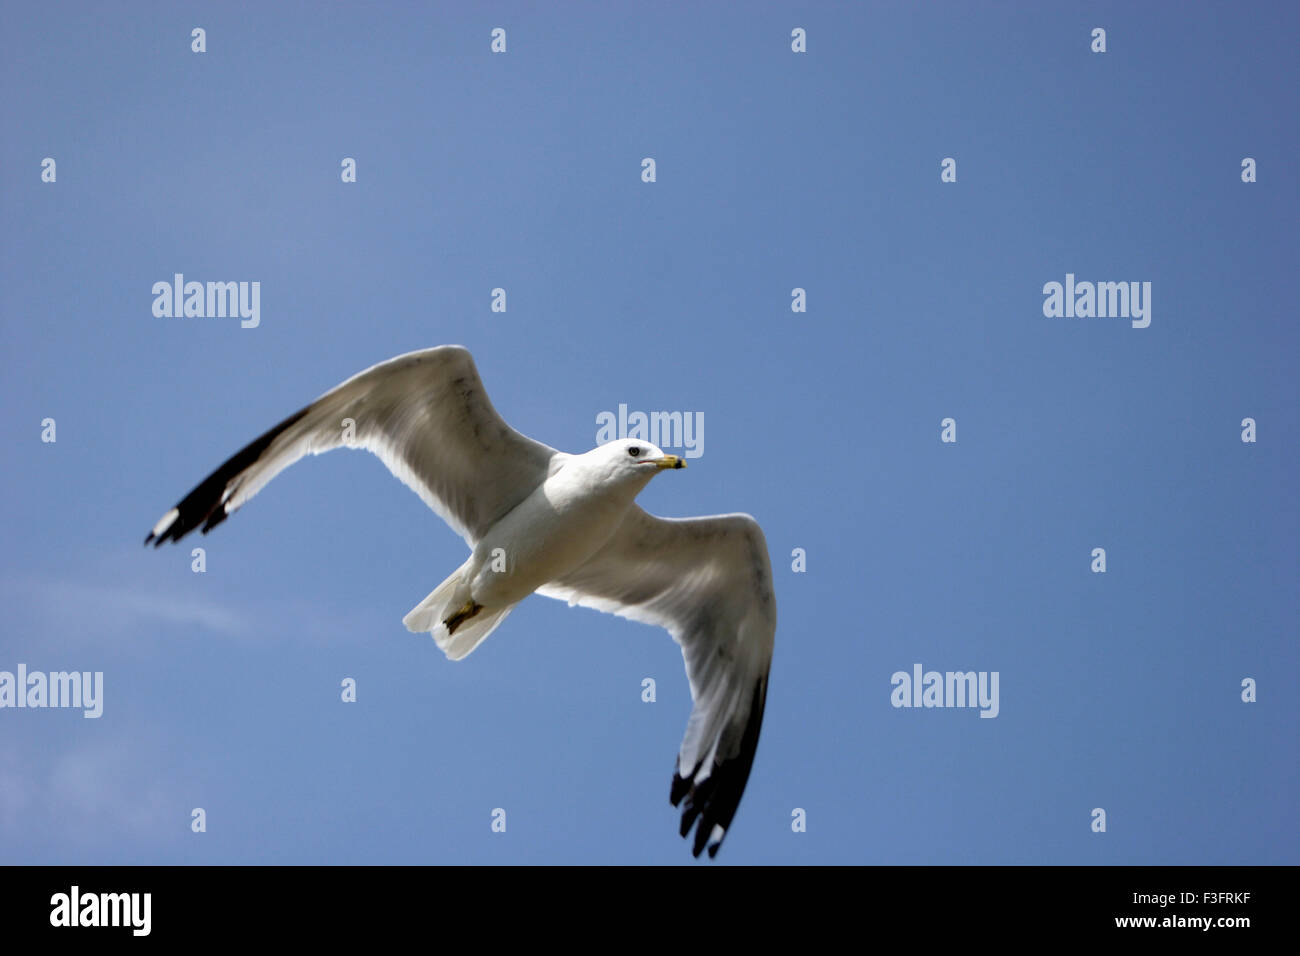 Seagull flying in sky Banque D'Images